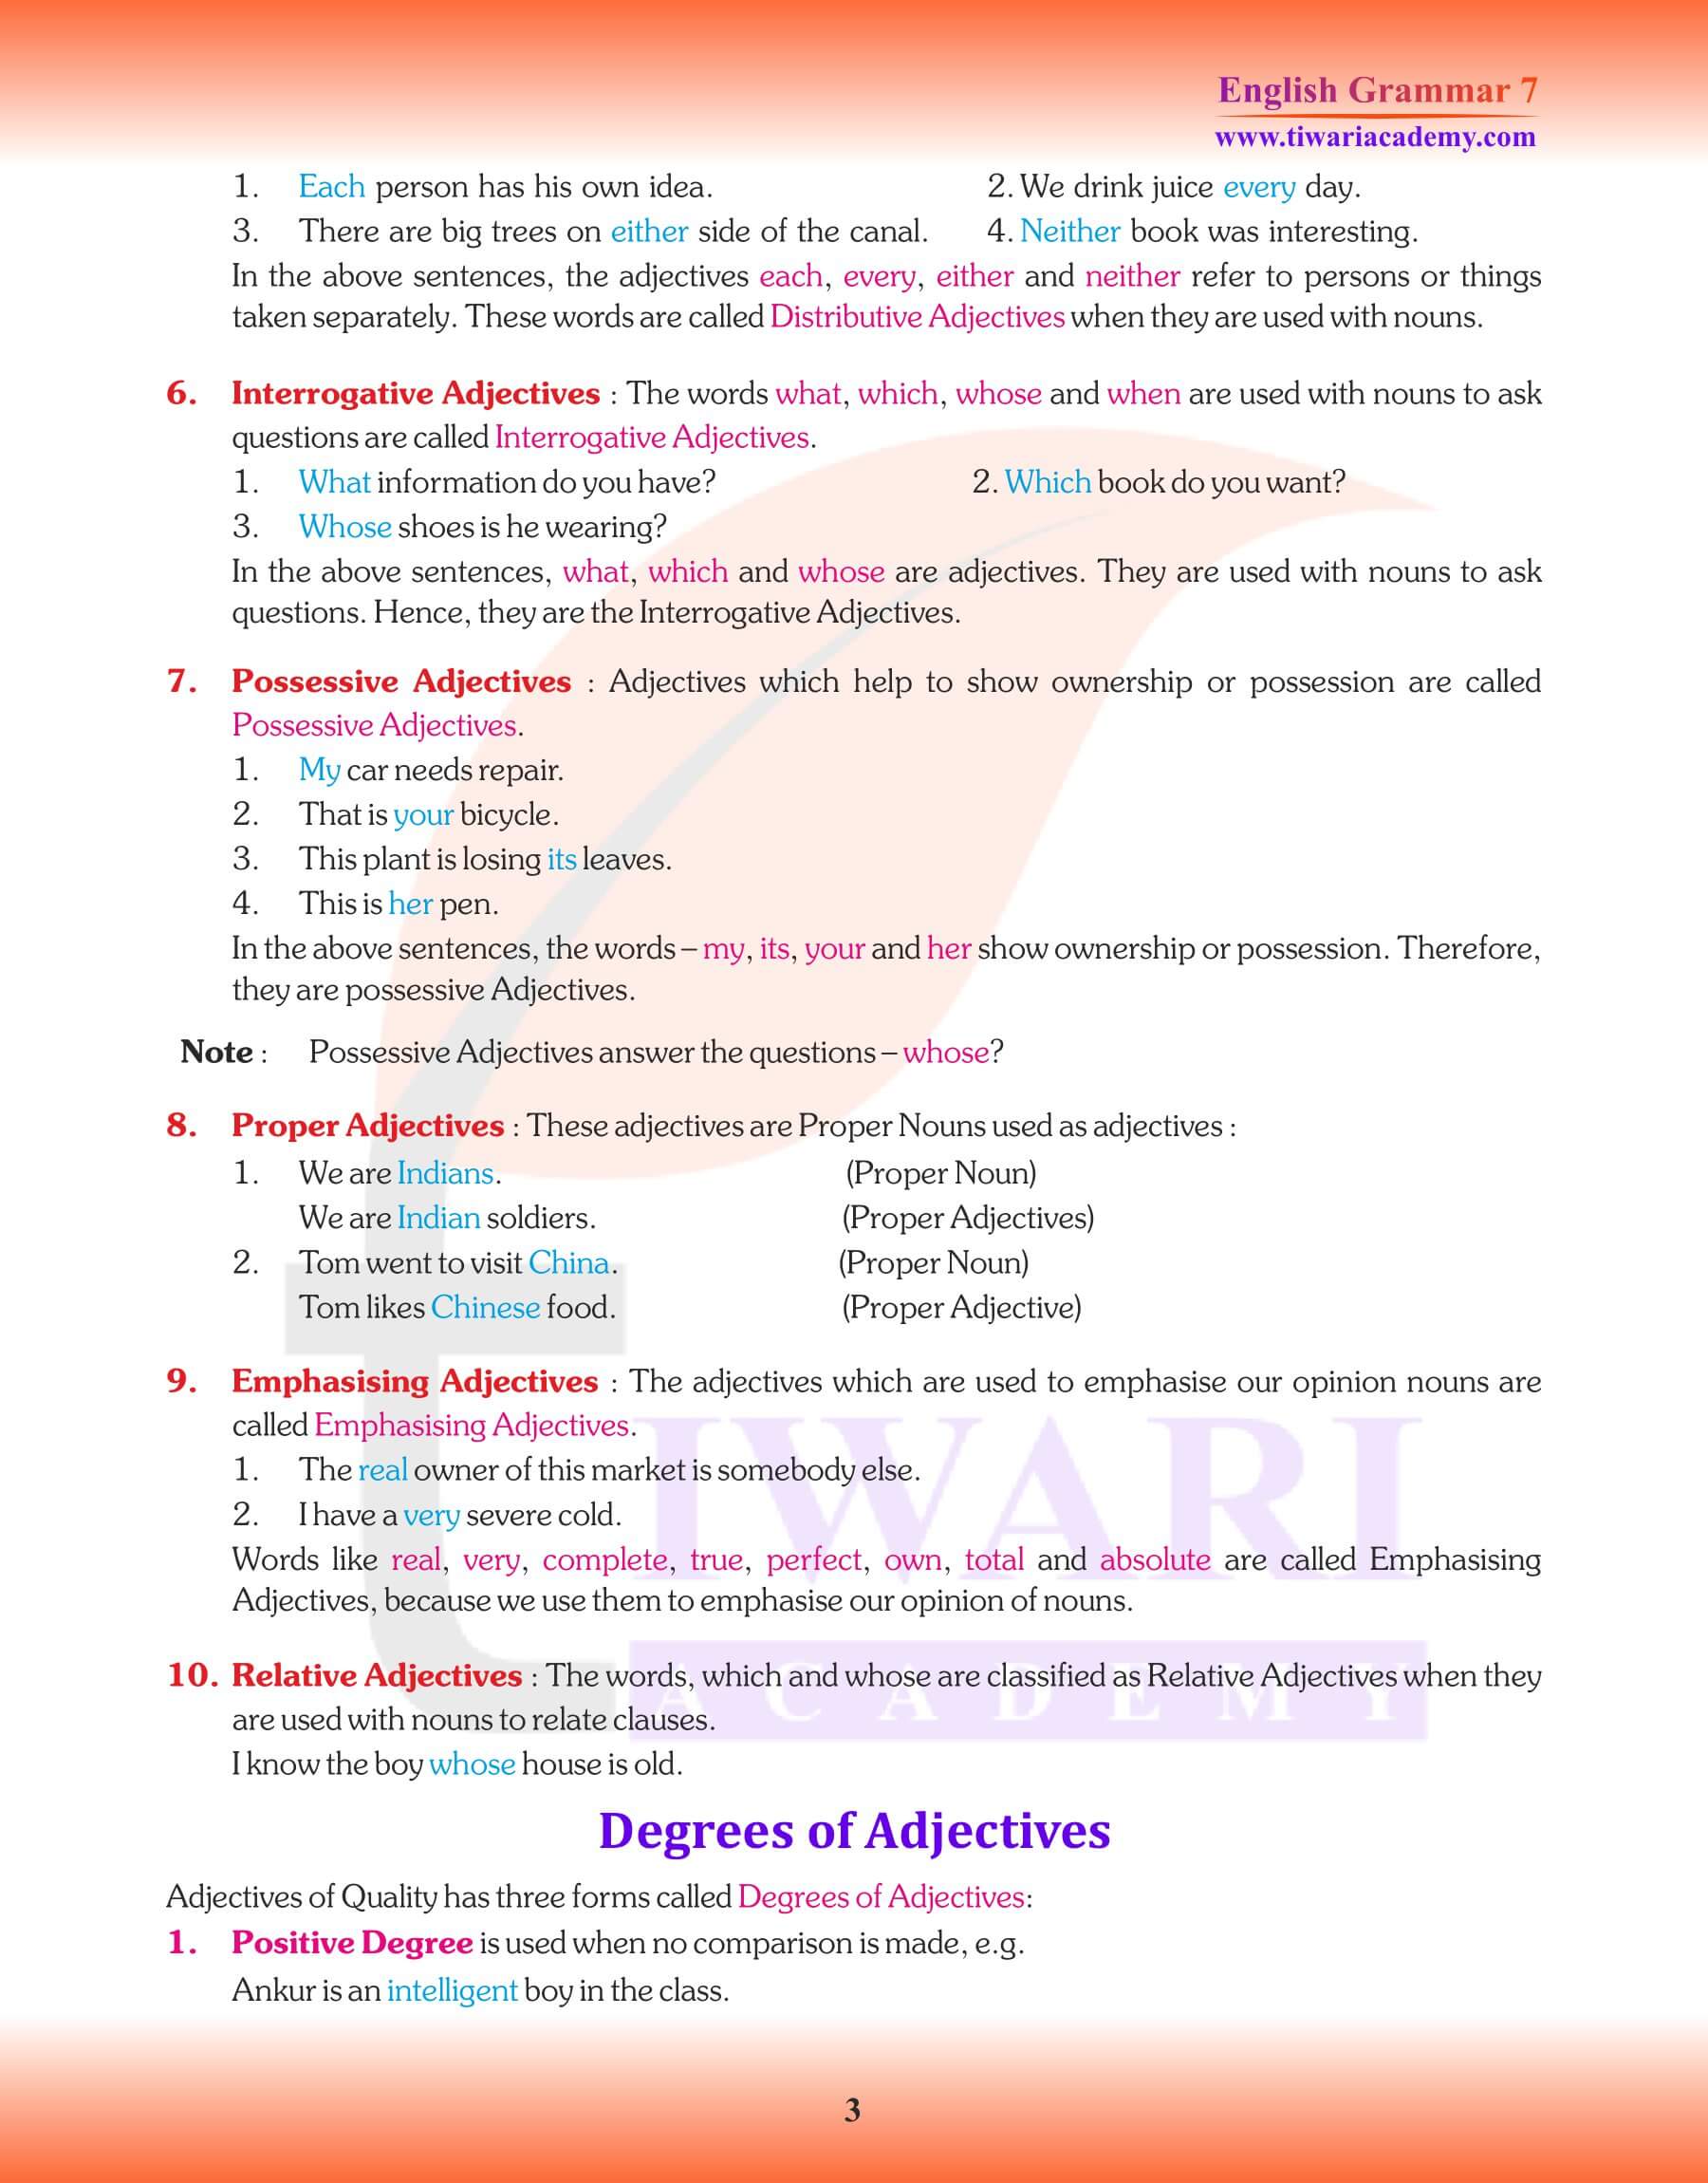 Class 7 English Grammar Chapter 7 Revision exercises